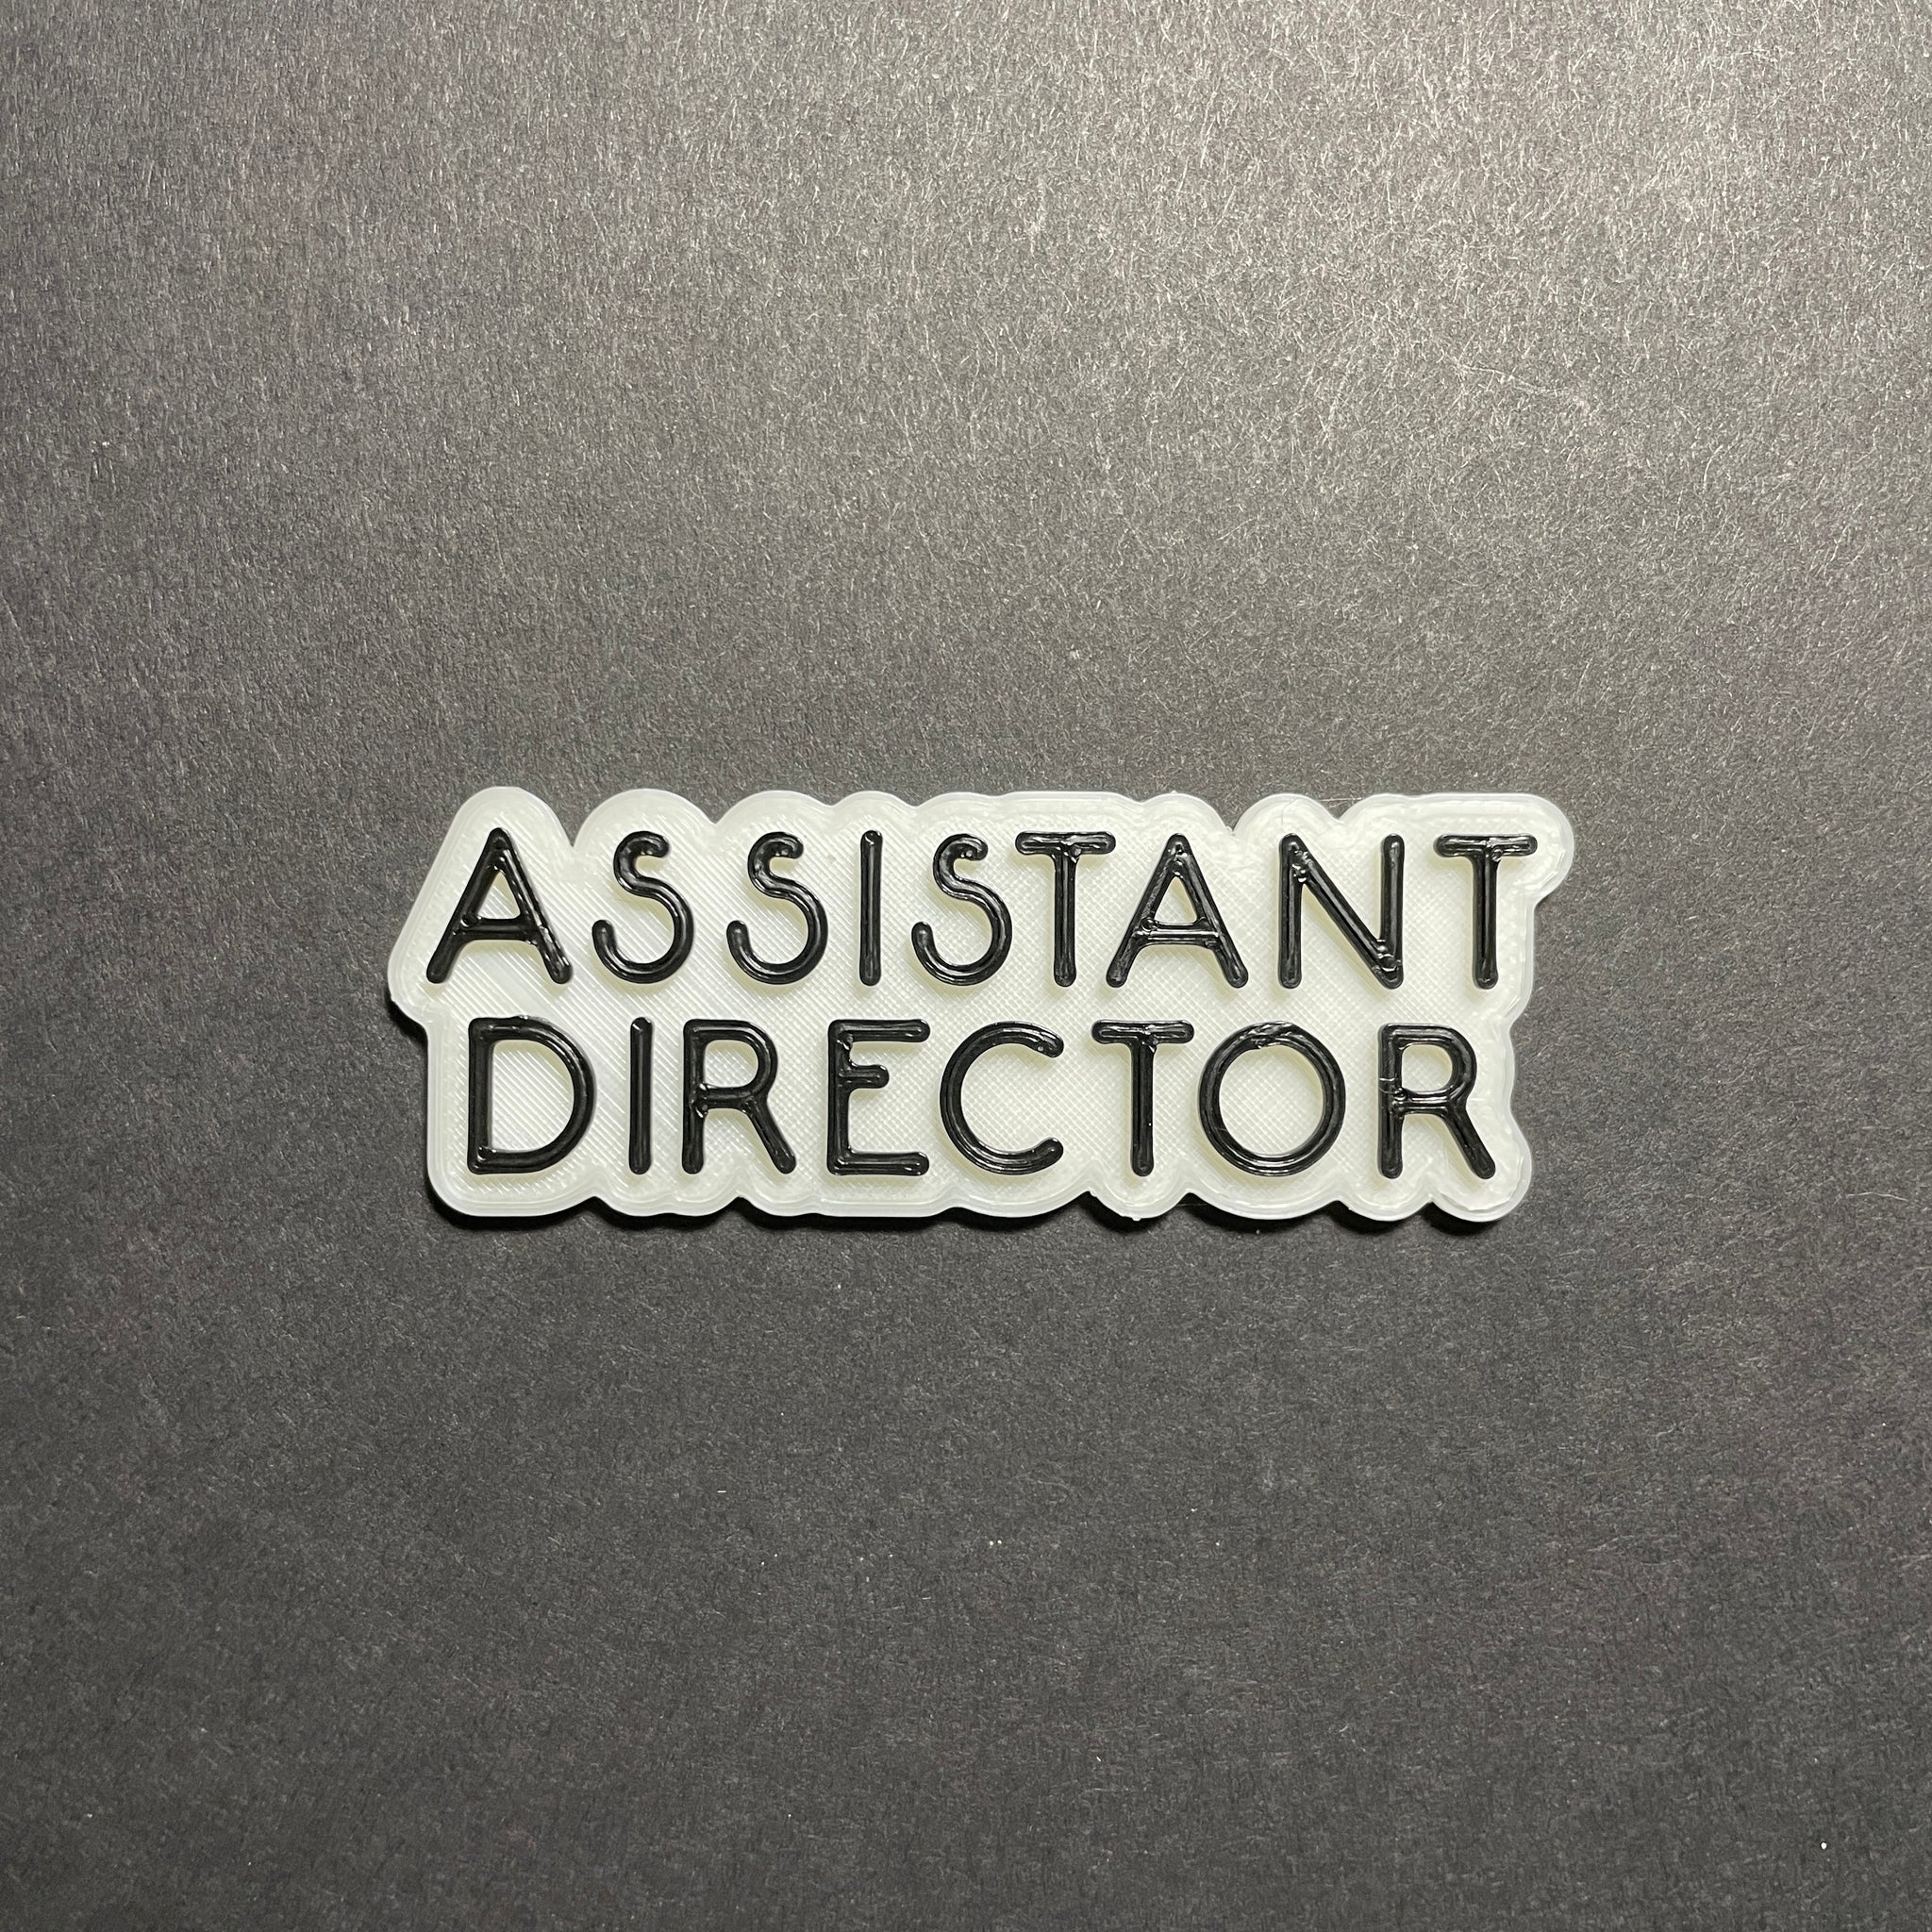 Magnetic Assistant Director Glow-in-the-Dark Badge, Offset